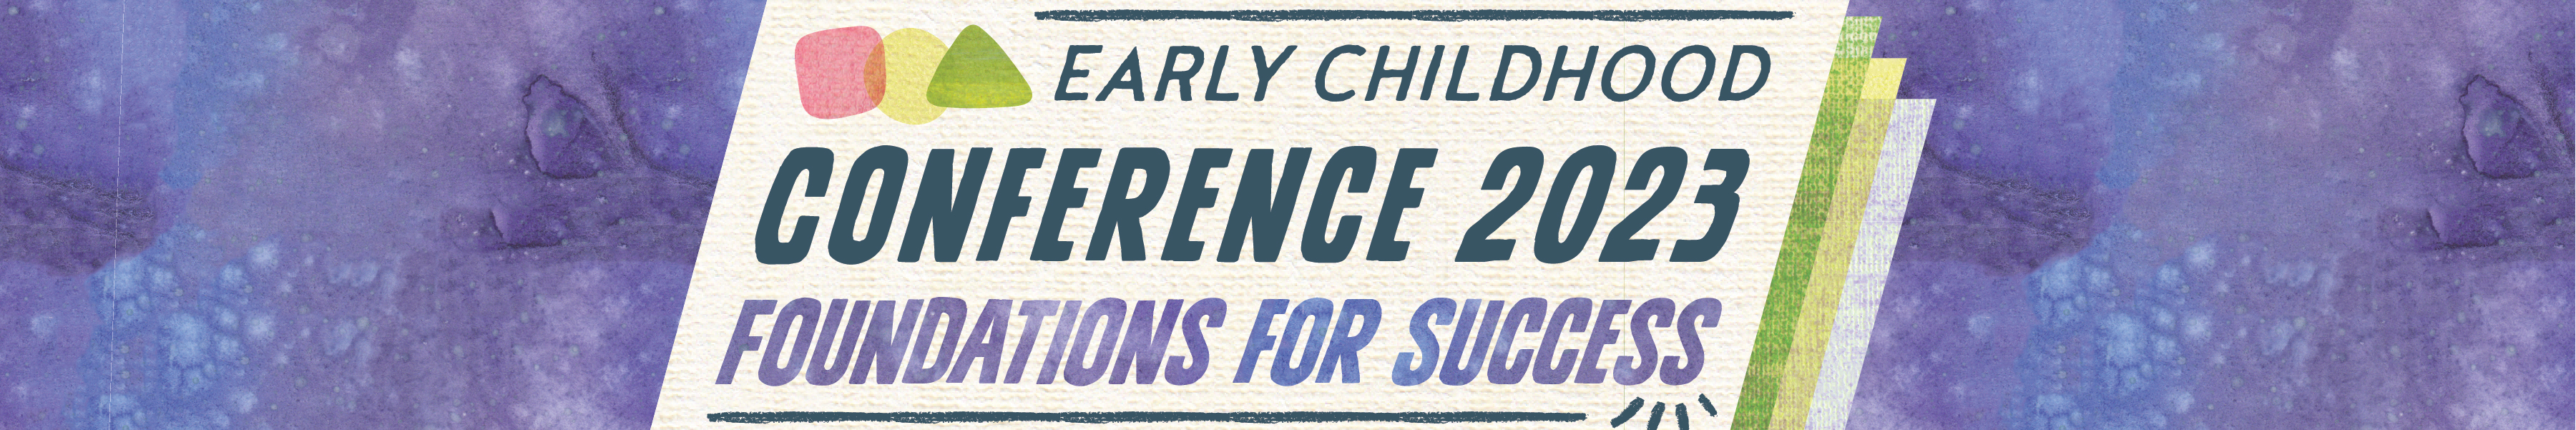 Early Childhood Conference 2023 - Foundations for Success